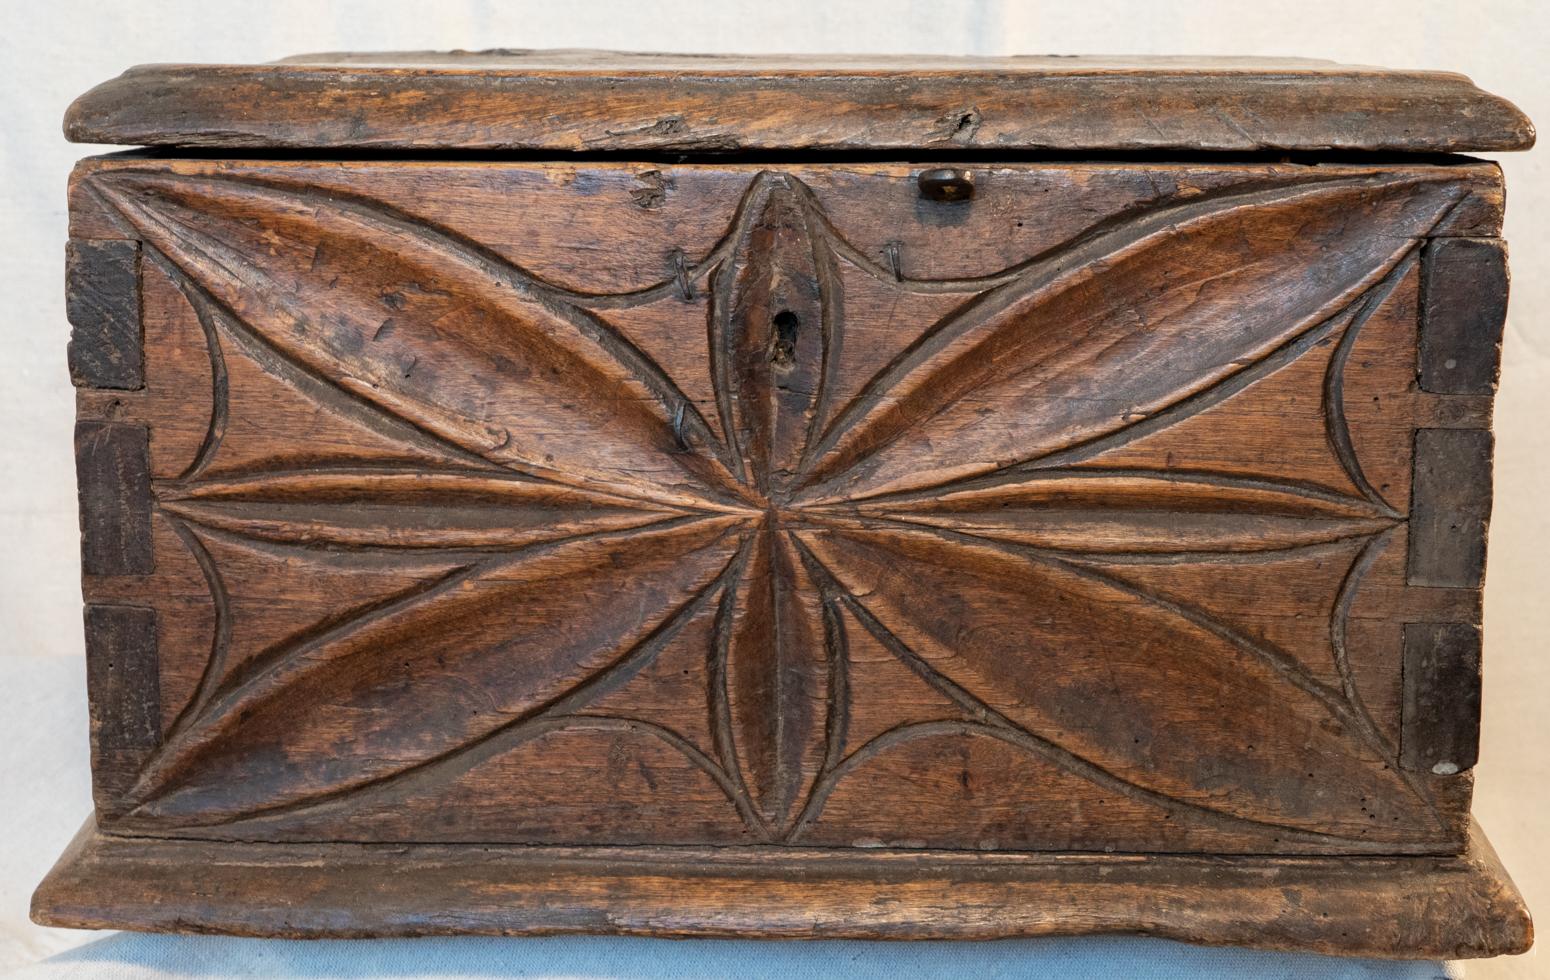 Early 18th century Italian carved and dovetailed walnut alms box, circa 1725
Large dovetails and old handwrought nails give this small scale box a heavy, rugged and strong build. A crude coin slot cut into the top complete with an old iron push